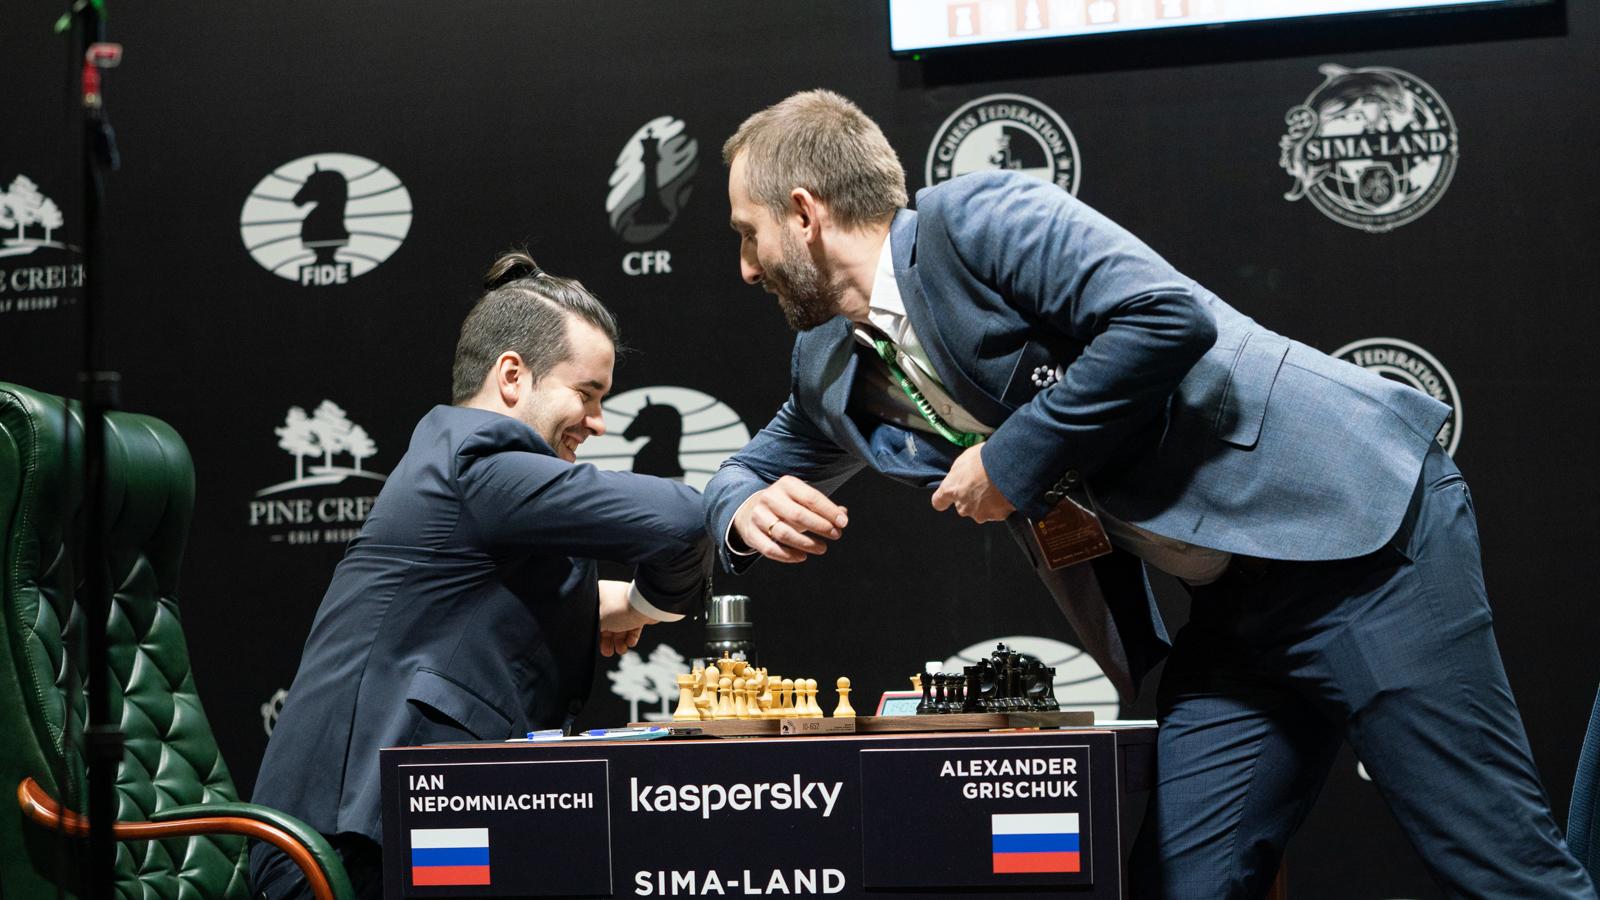 Today in Chess, FIDE Candidates Round 3 Recap